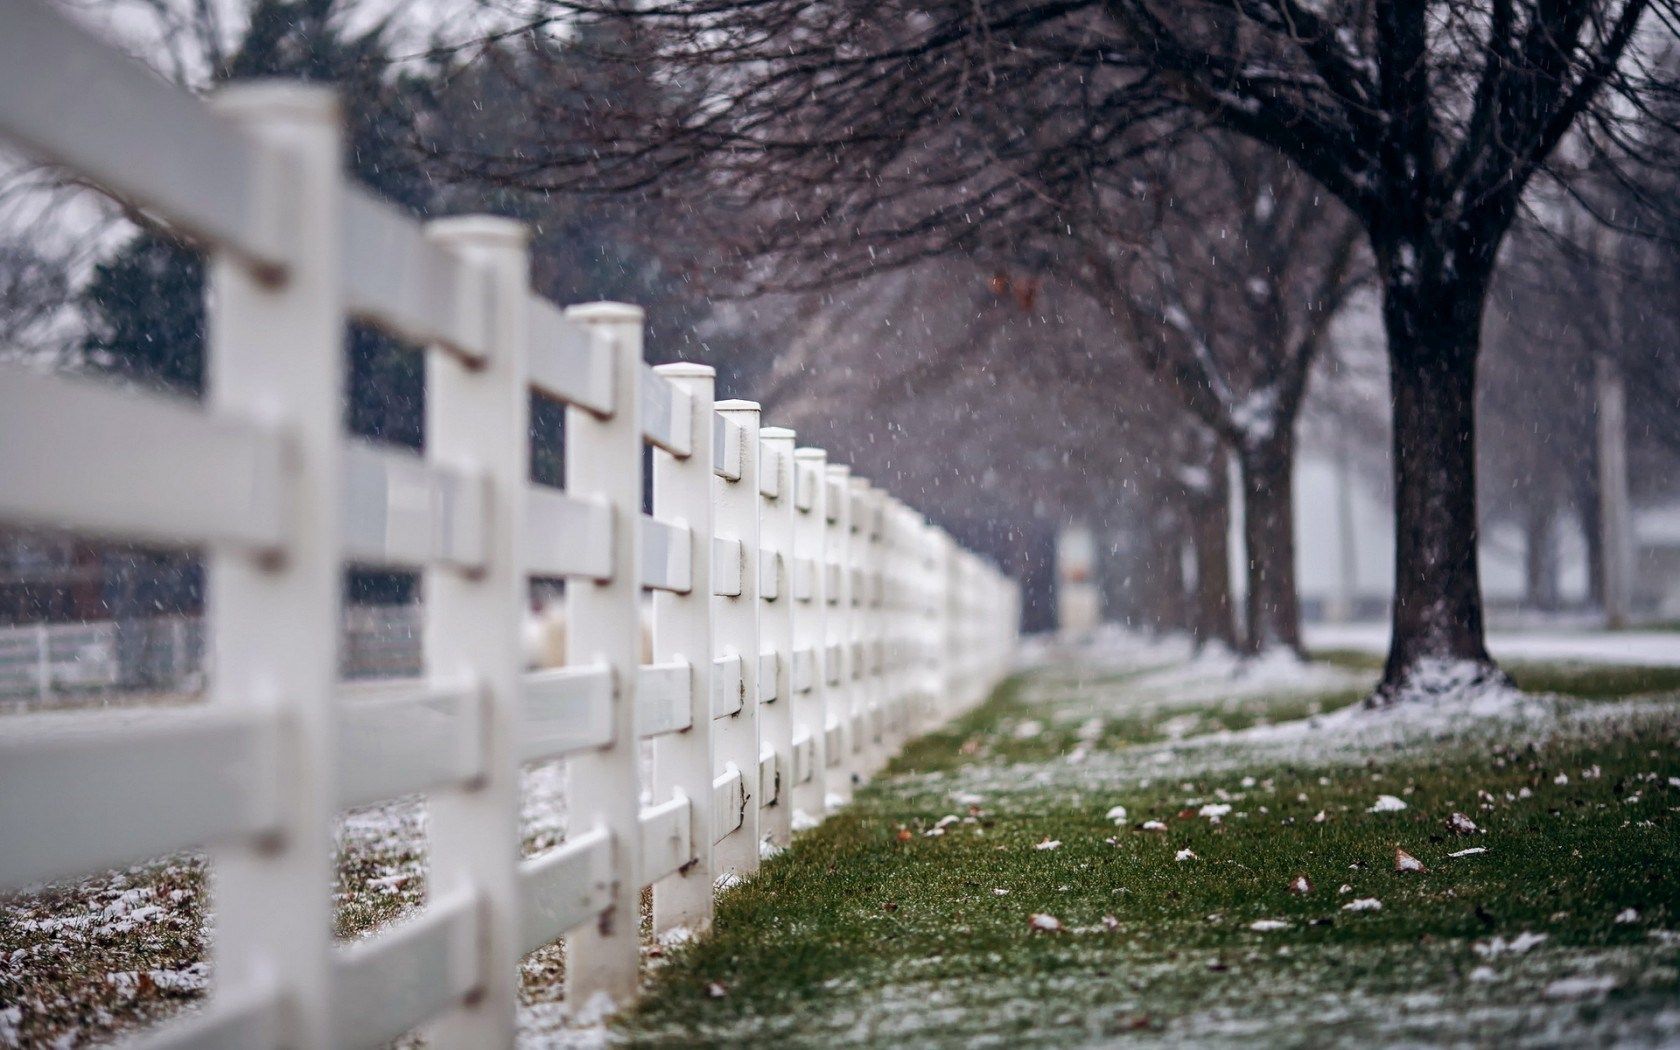 HD wallpaper, Snow, Snowflakes, Trees, Nature, Fence